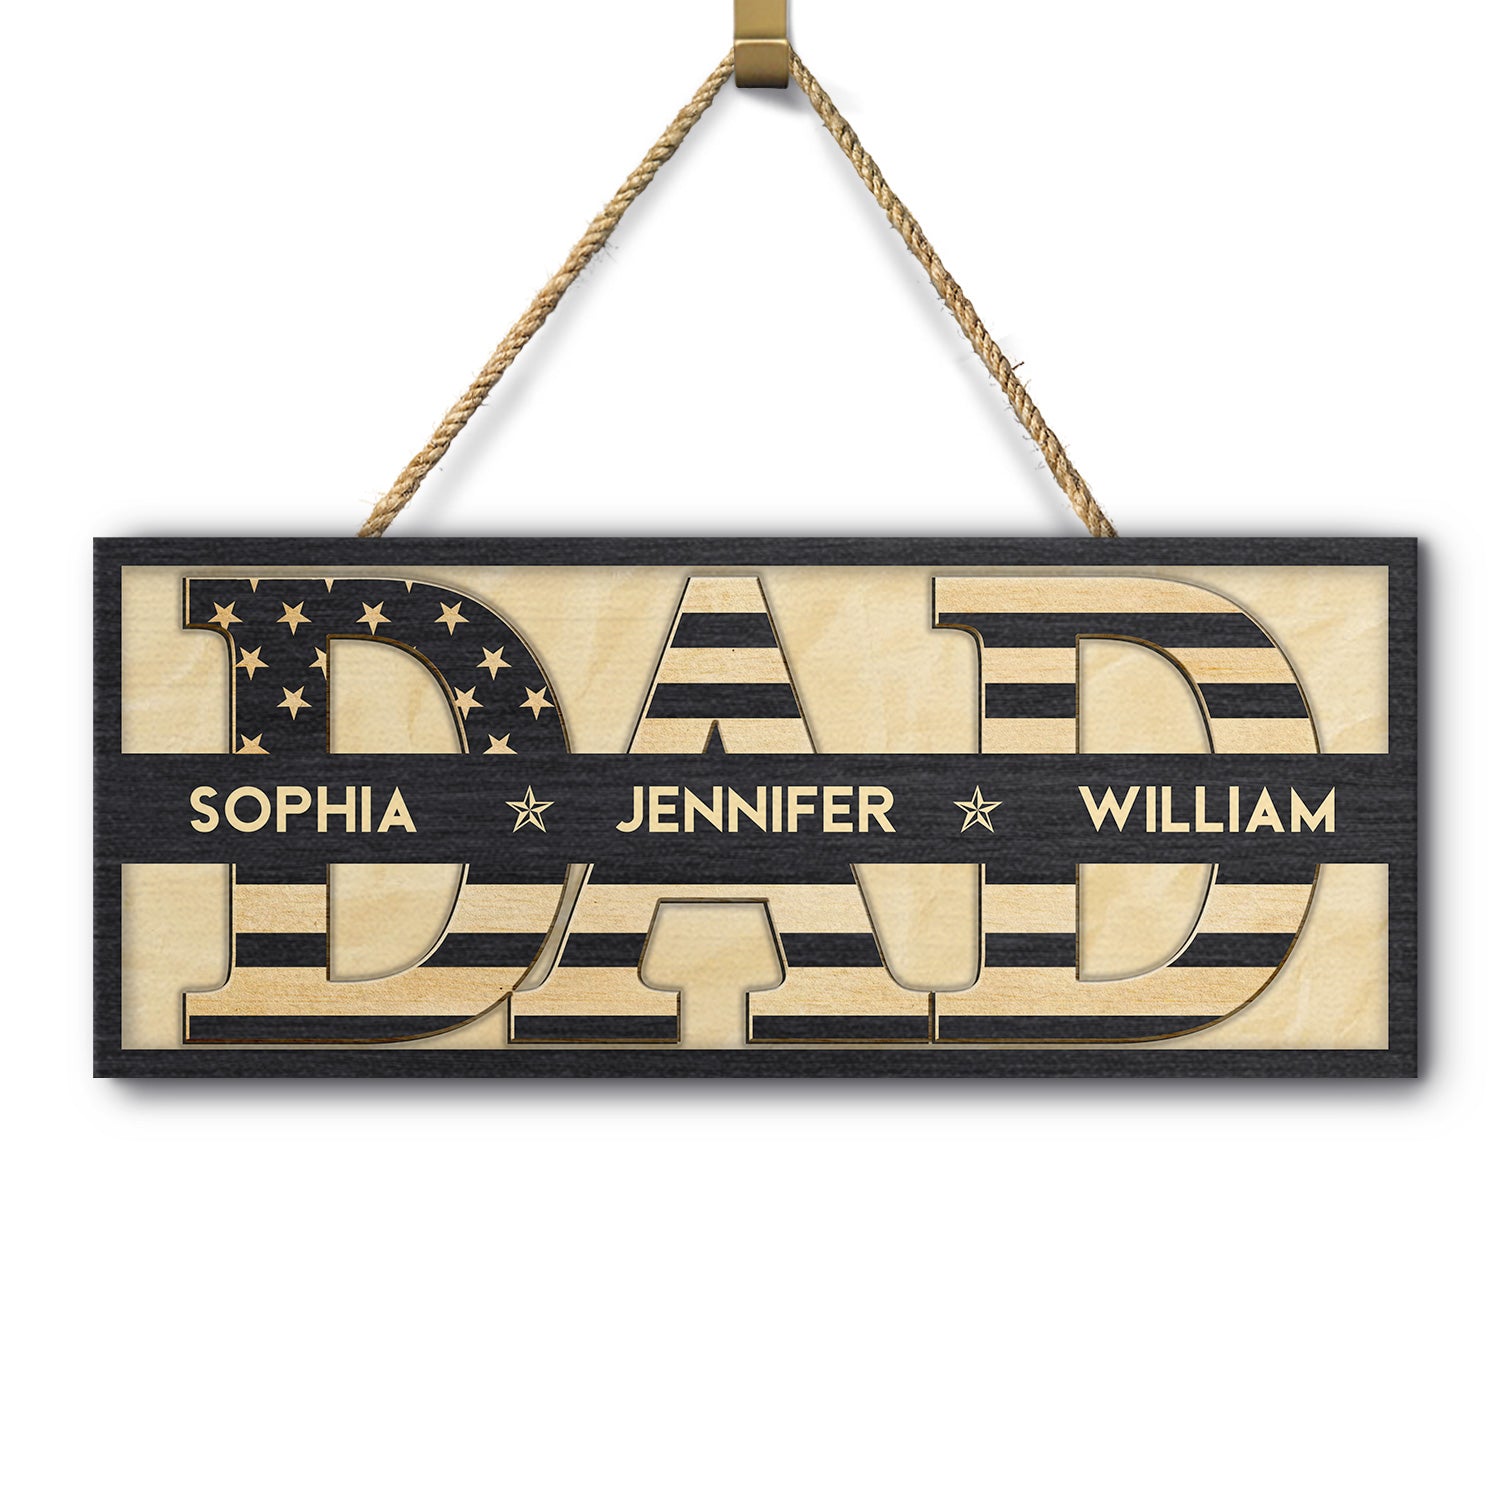 Dad - Gift For Father, Grandfather, Grandpa - Personalized Custom Shaped Wood Sign